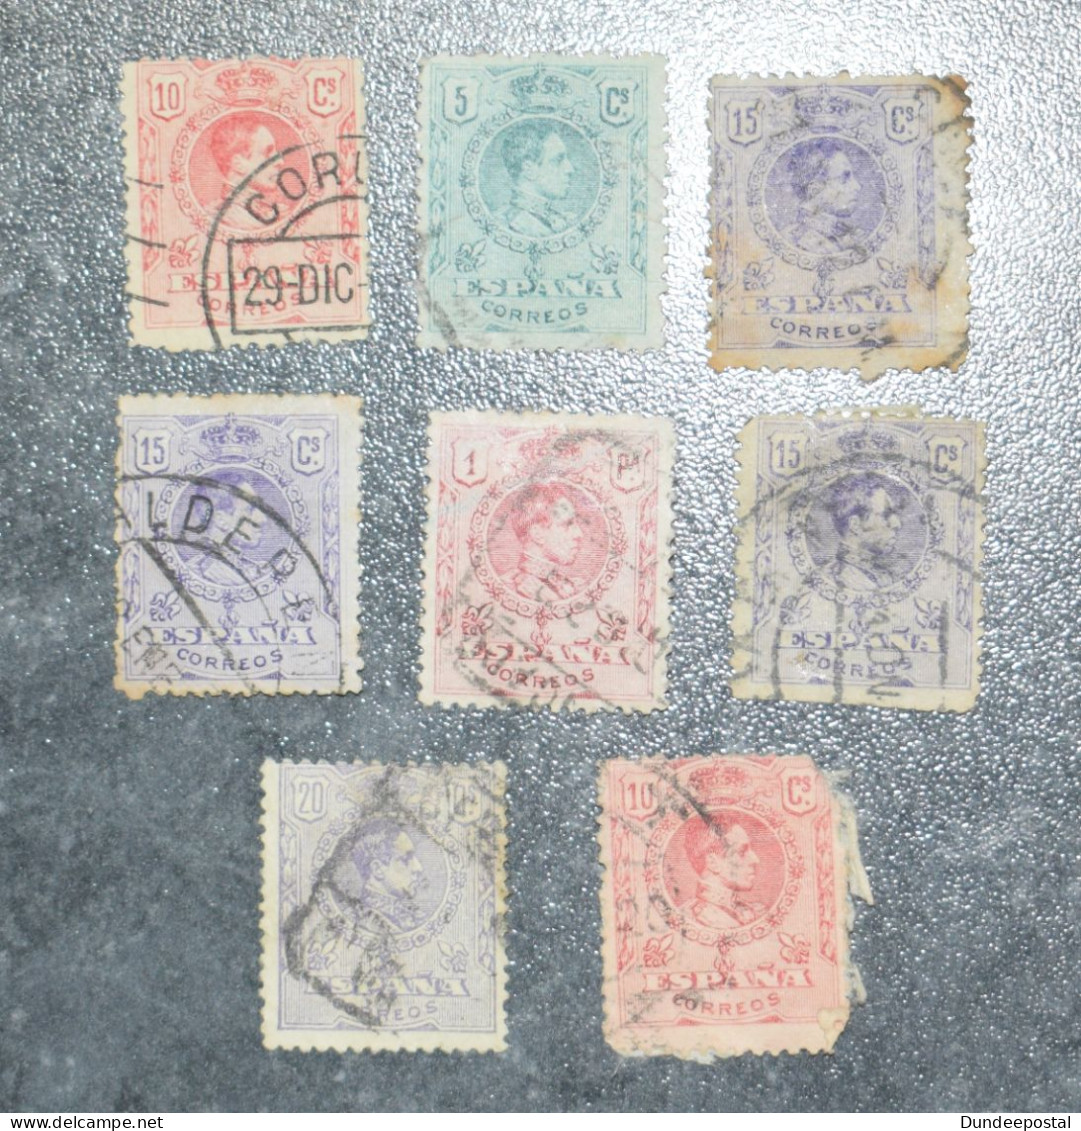 SPAIN  STAMPS  Alfonso Control Numbers  1909  ~~L@@K~~ - Used Stamps